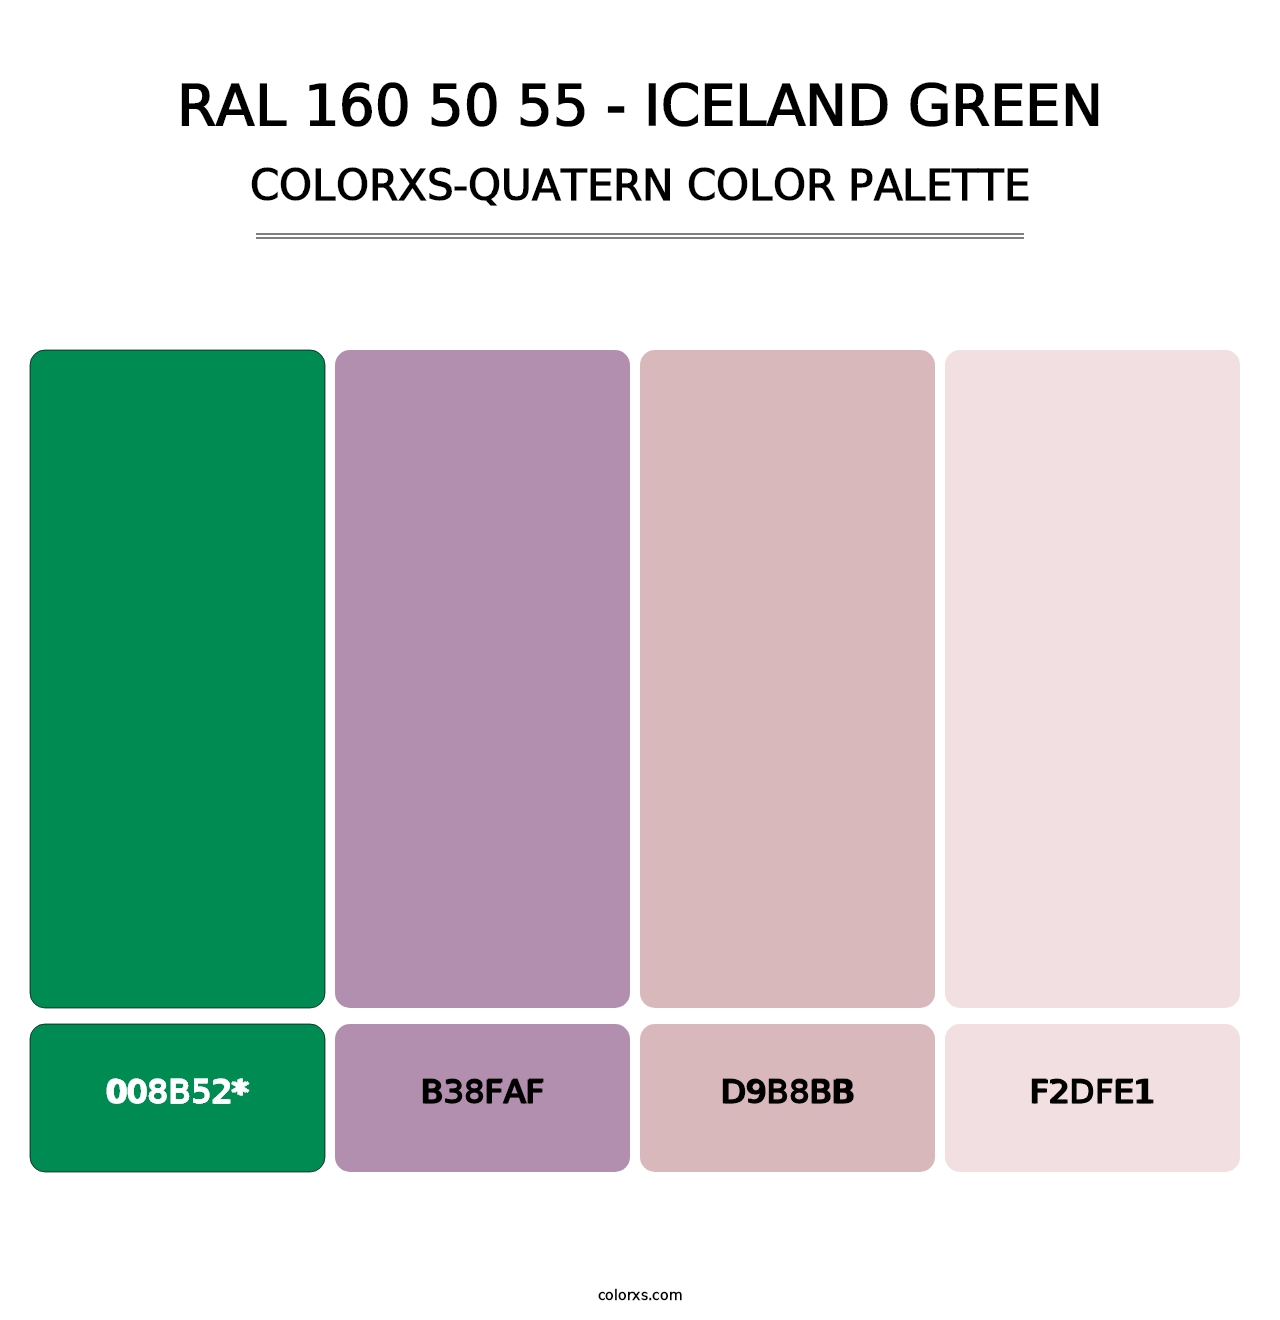 RAL 160 50 55 - Iceland Green - Colorxs Quatern Palette